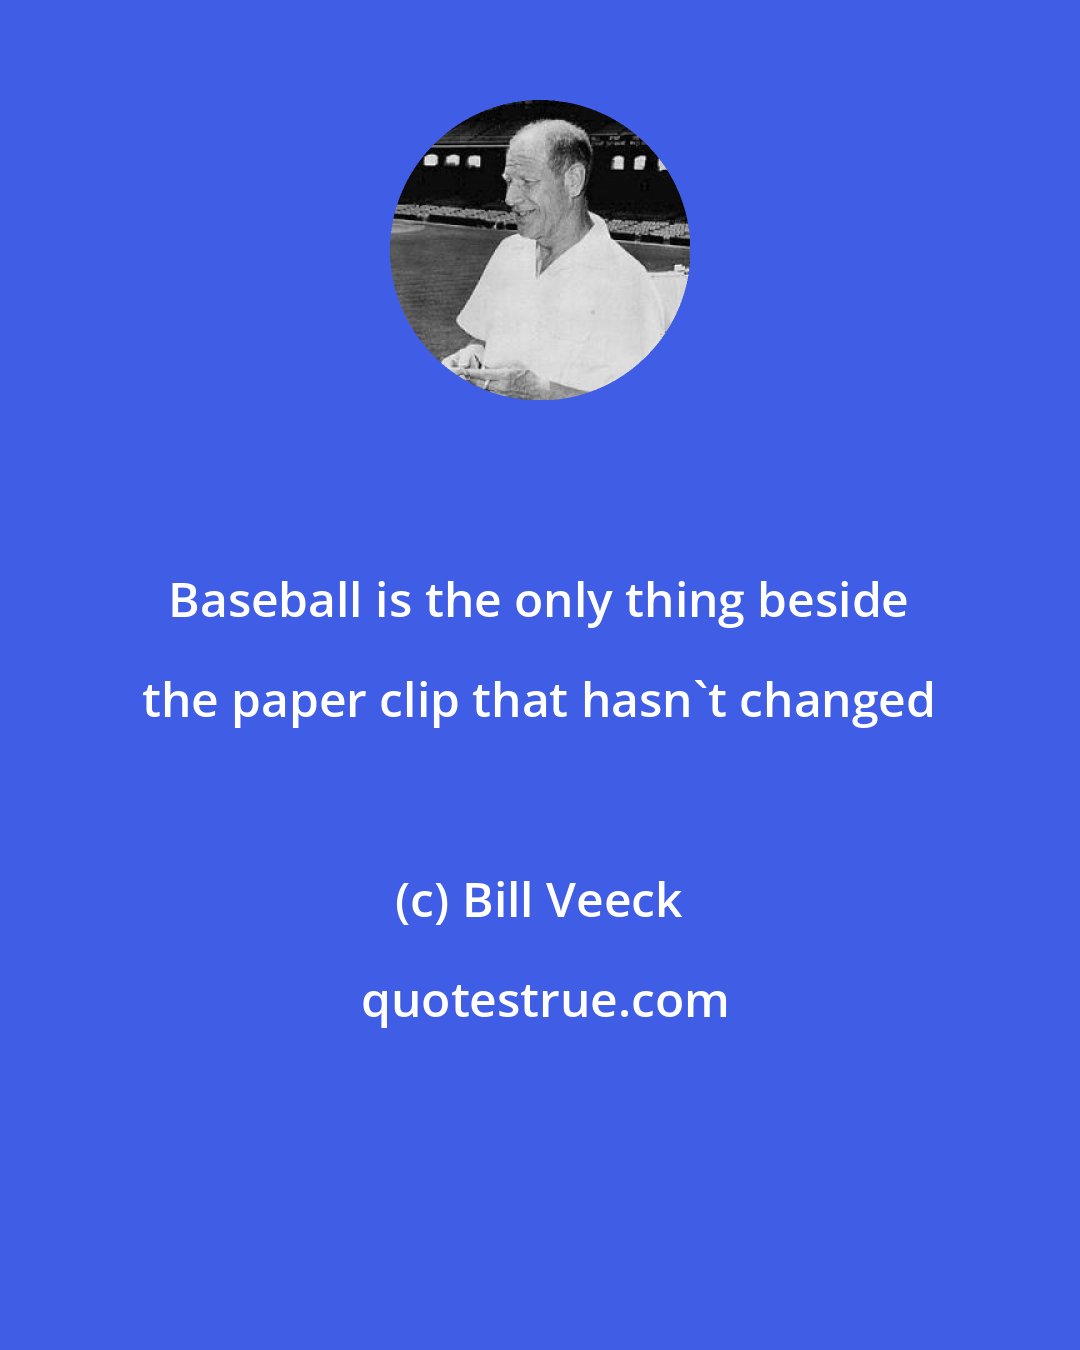 Bill Veeck: Baseball is the only thing beside the paper clip that hasn't changed